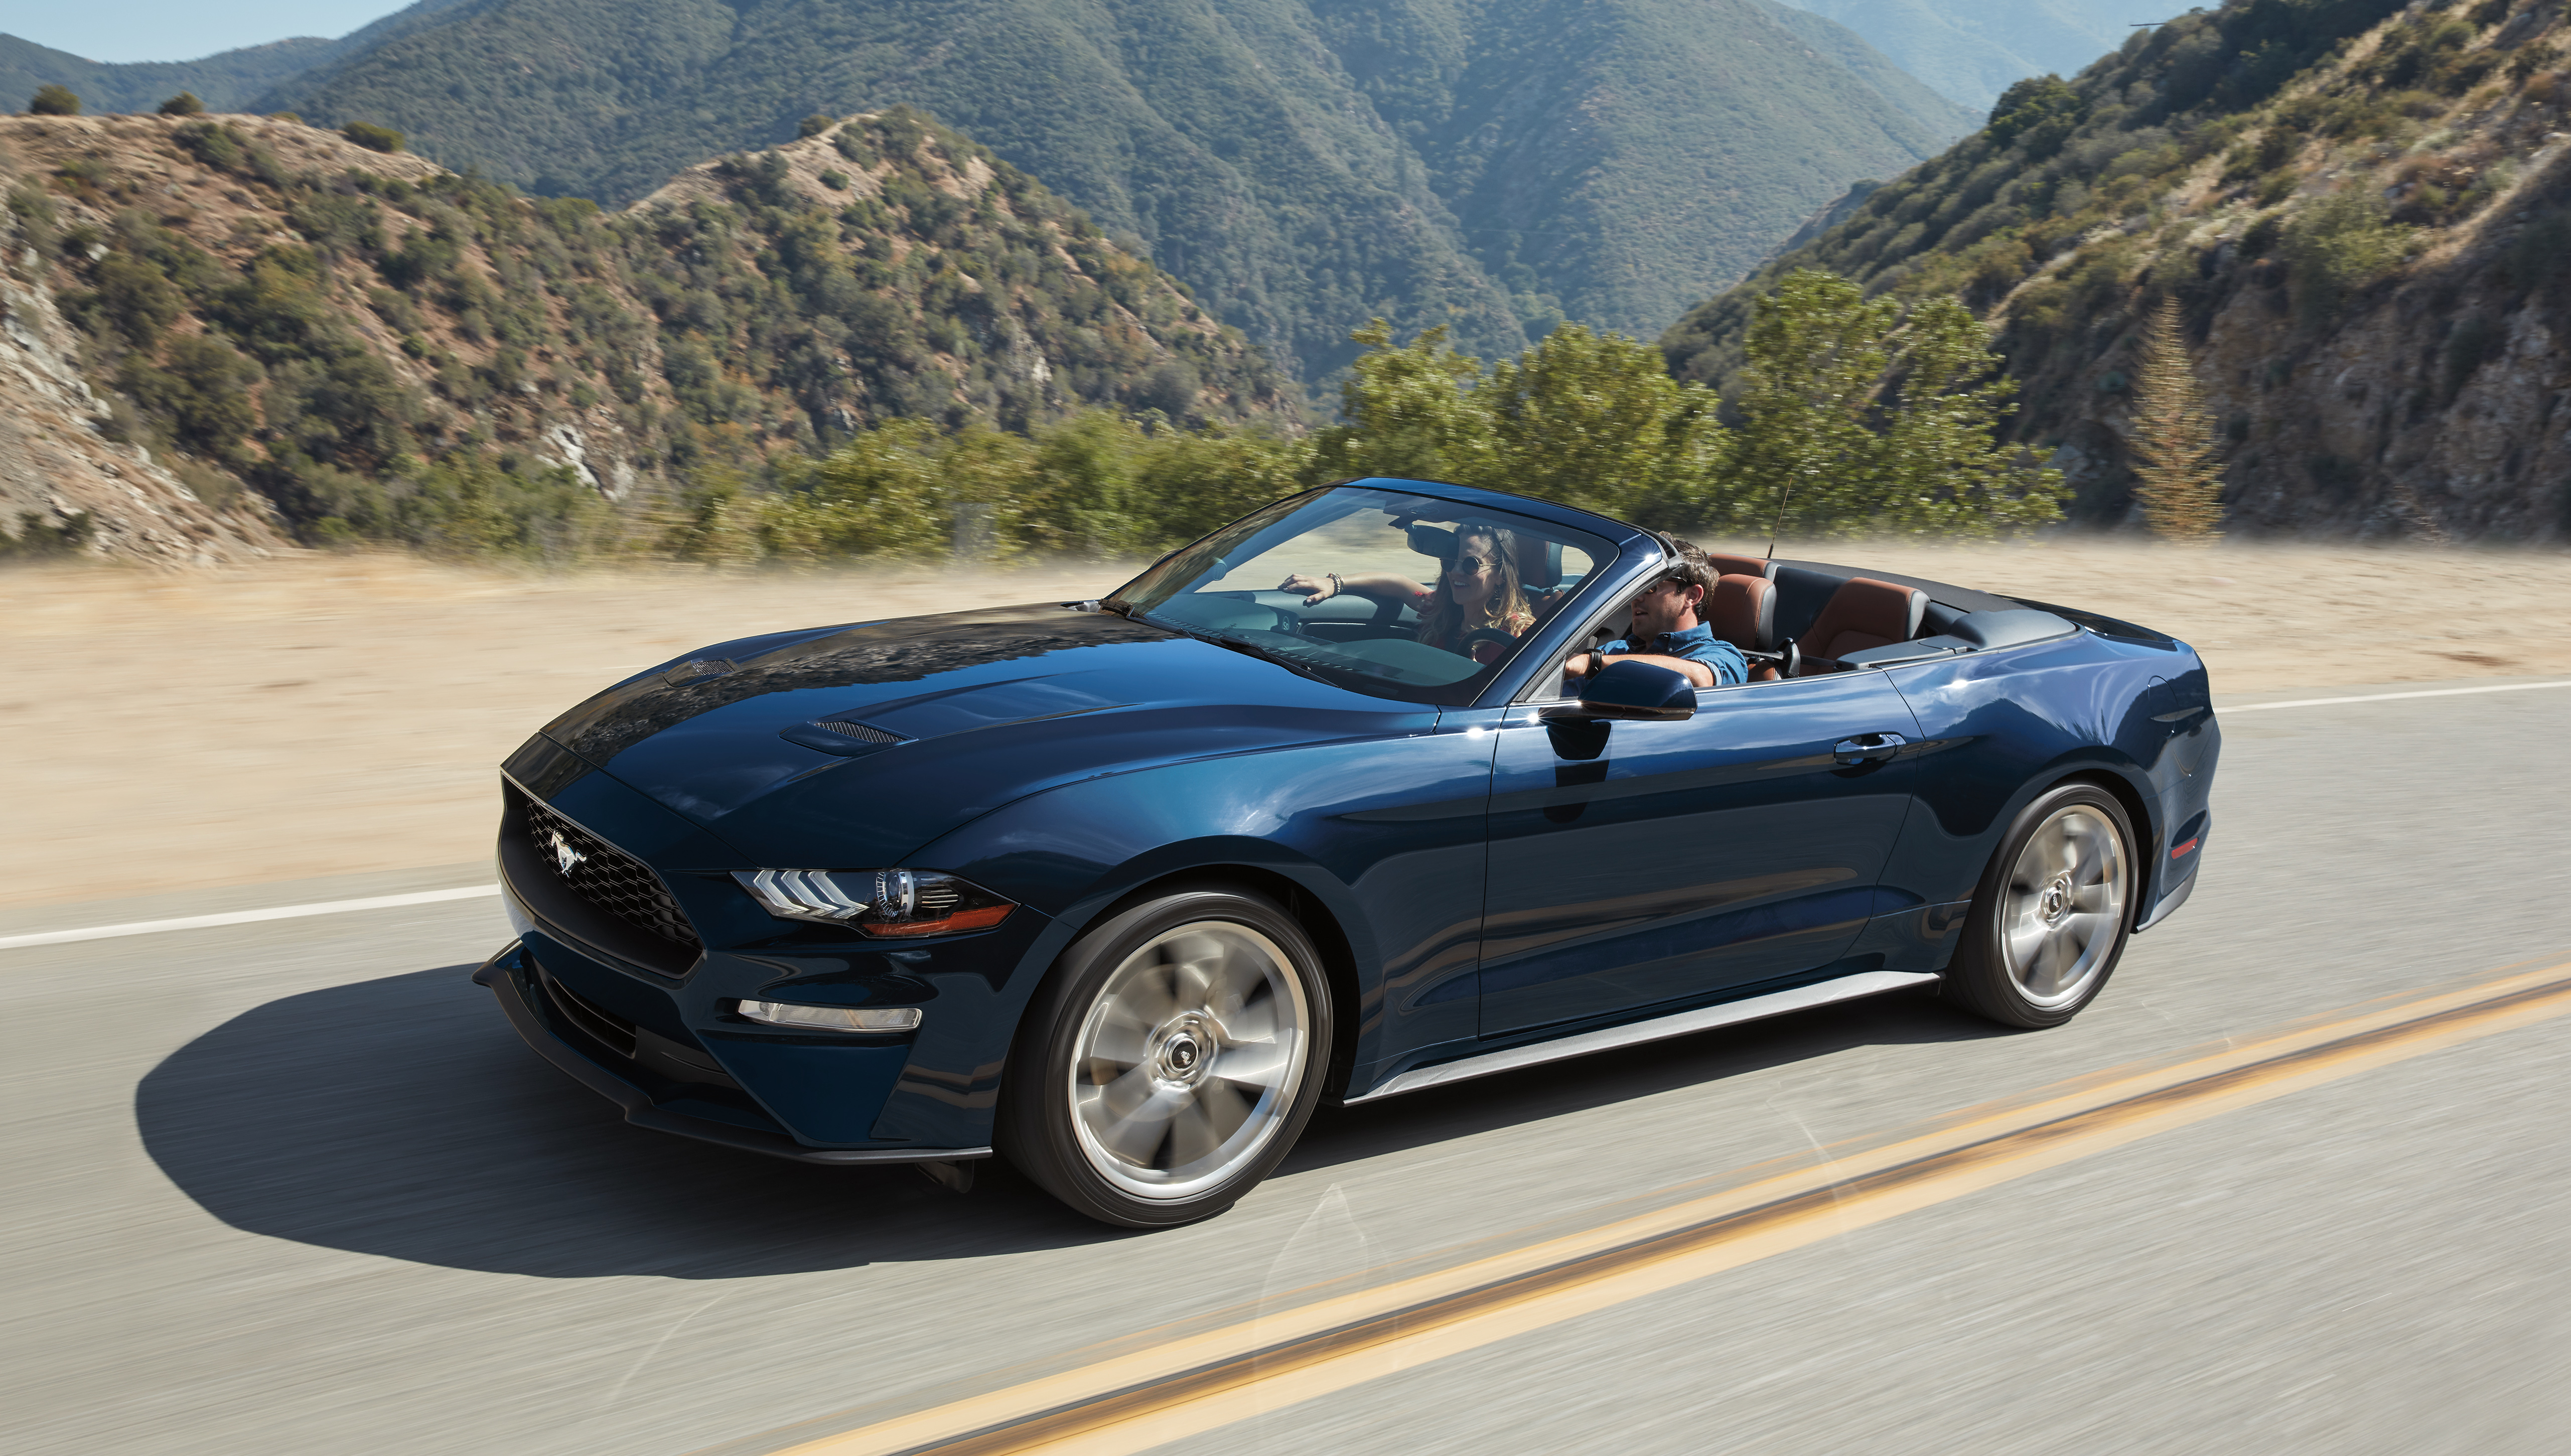 A 2019 blue Ford Mustang Ecoboost Convertible on the track.